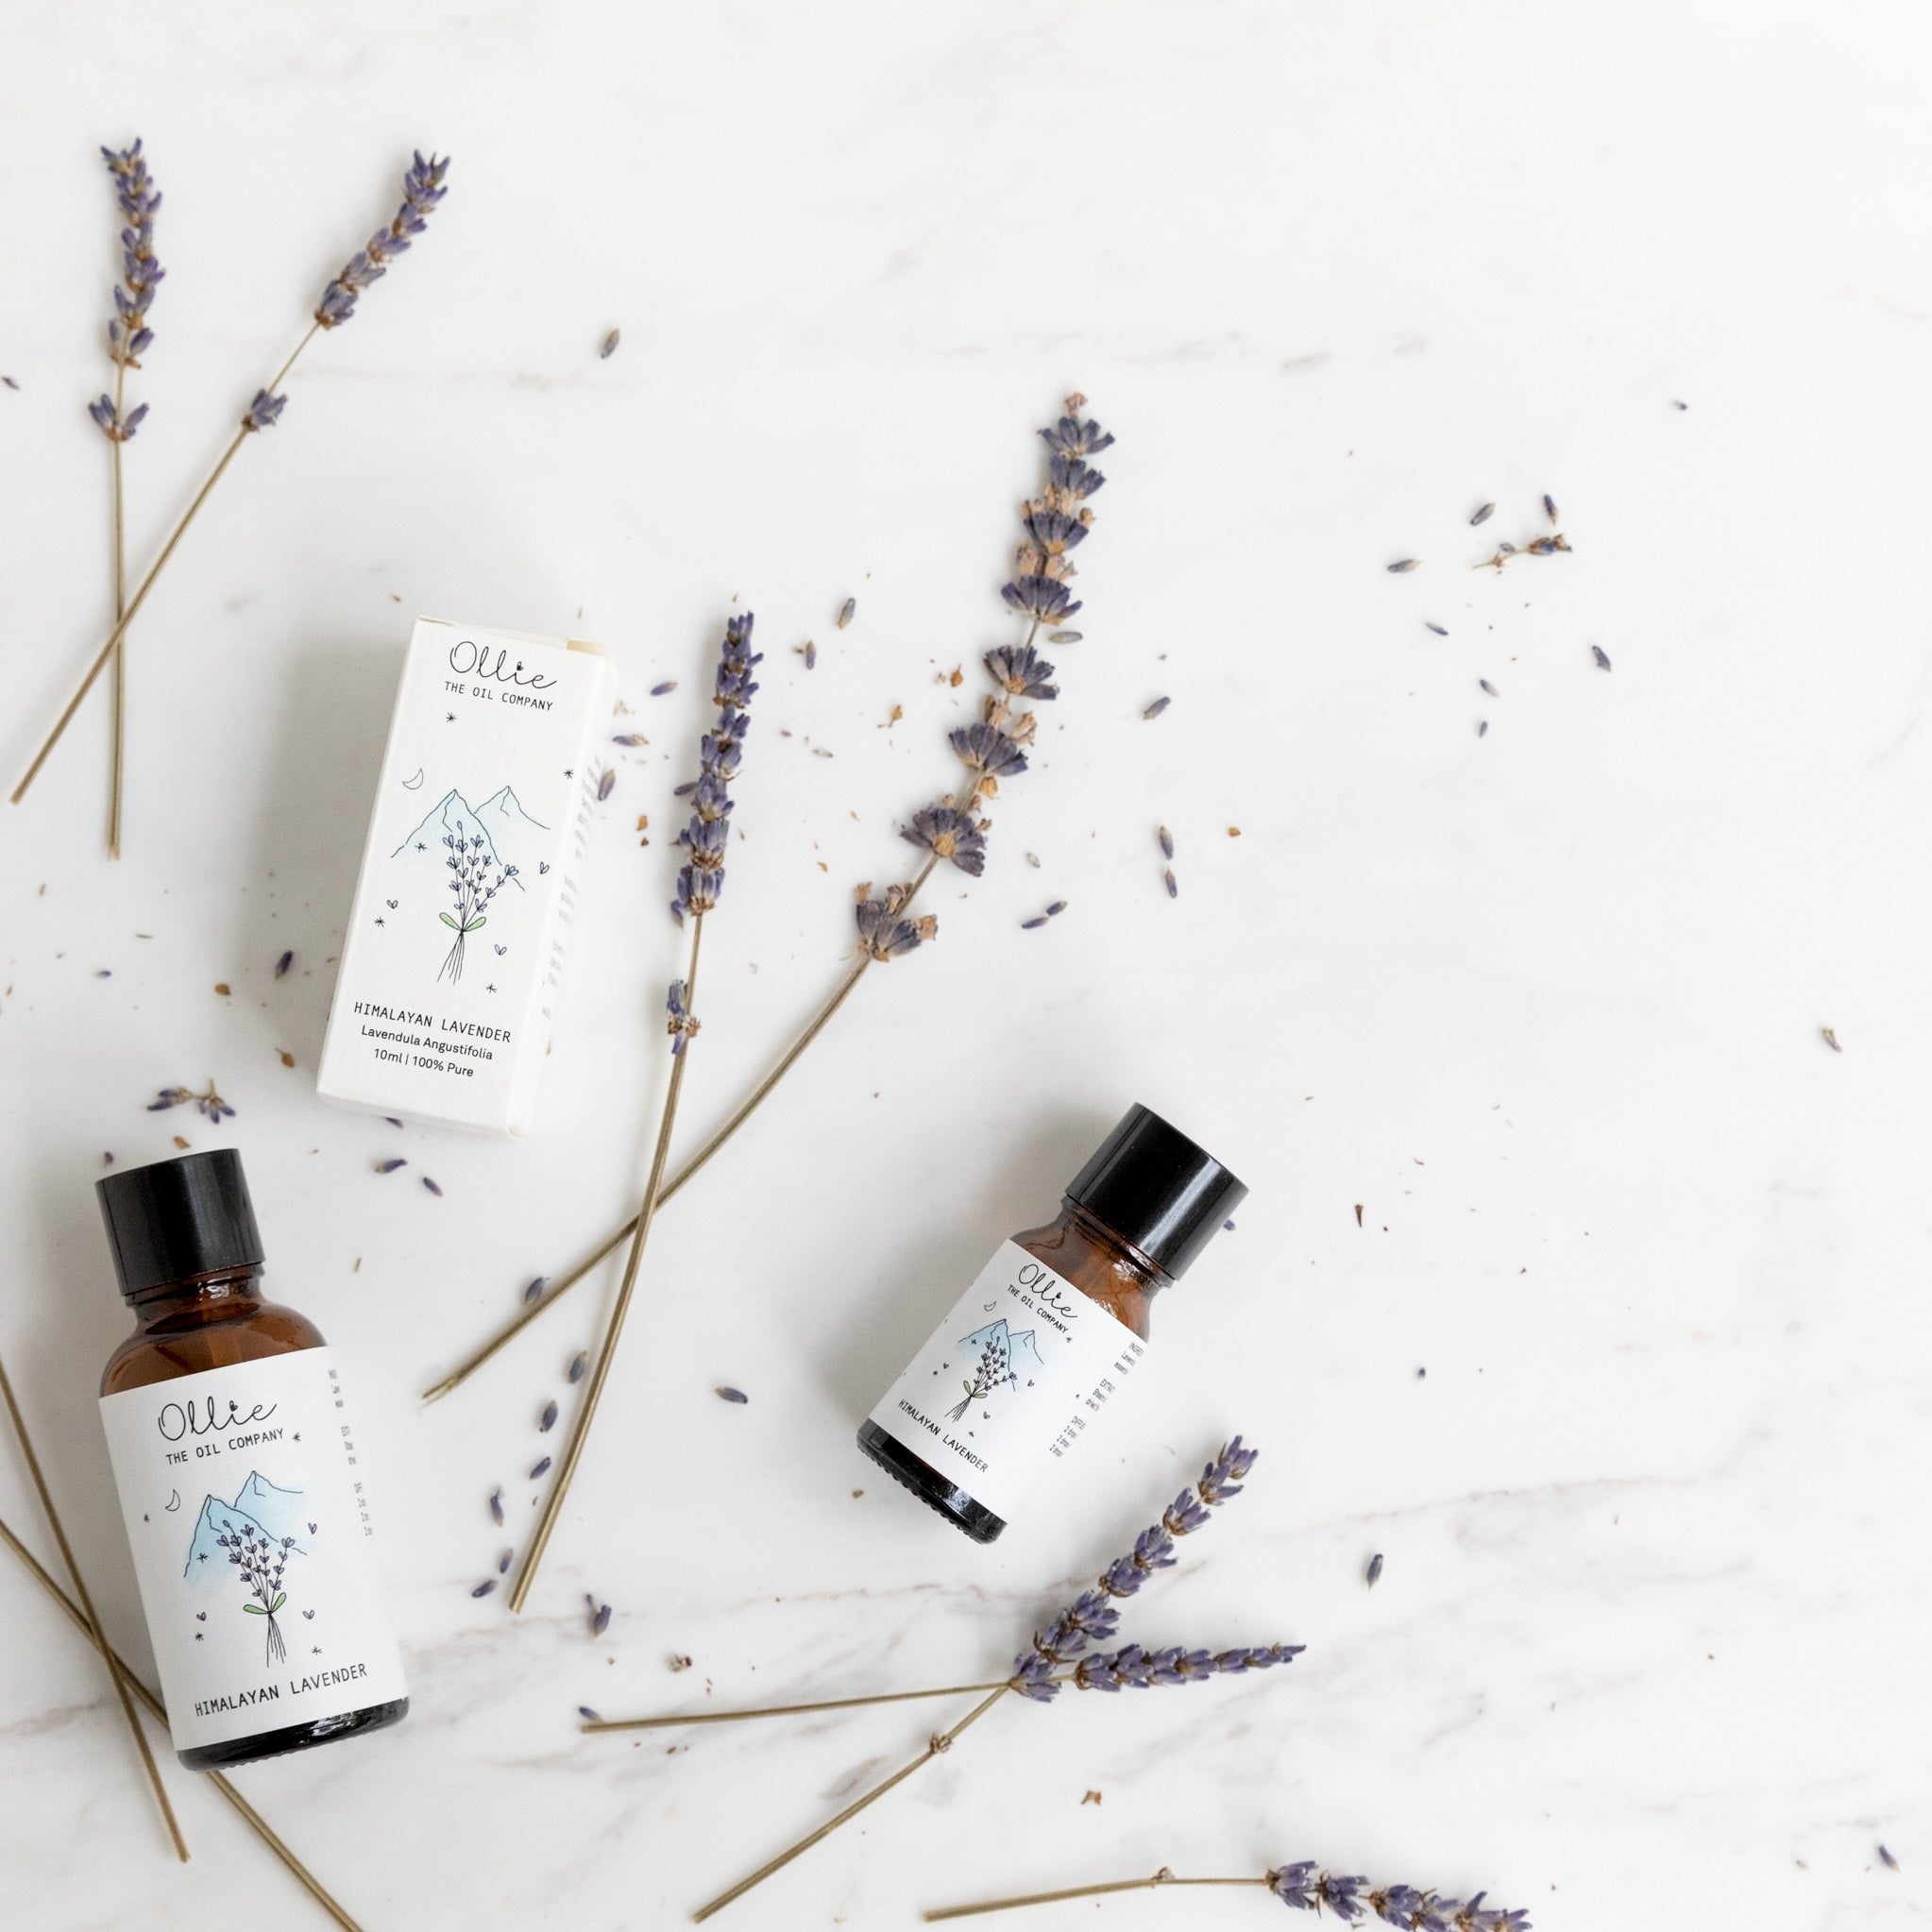 Ollie Himalayan Lavender Oil | Skincare Oils | The Green Collective SG